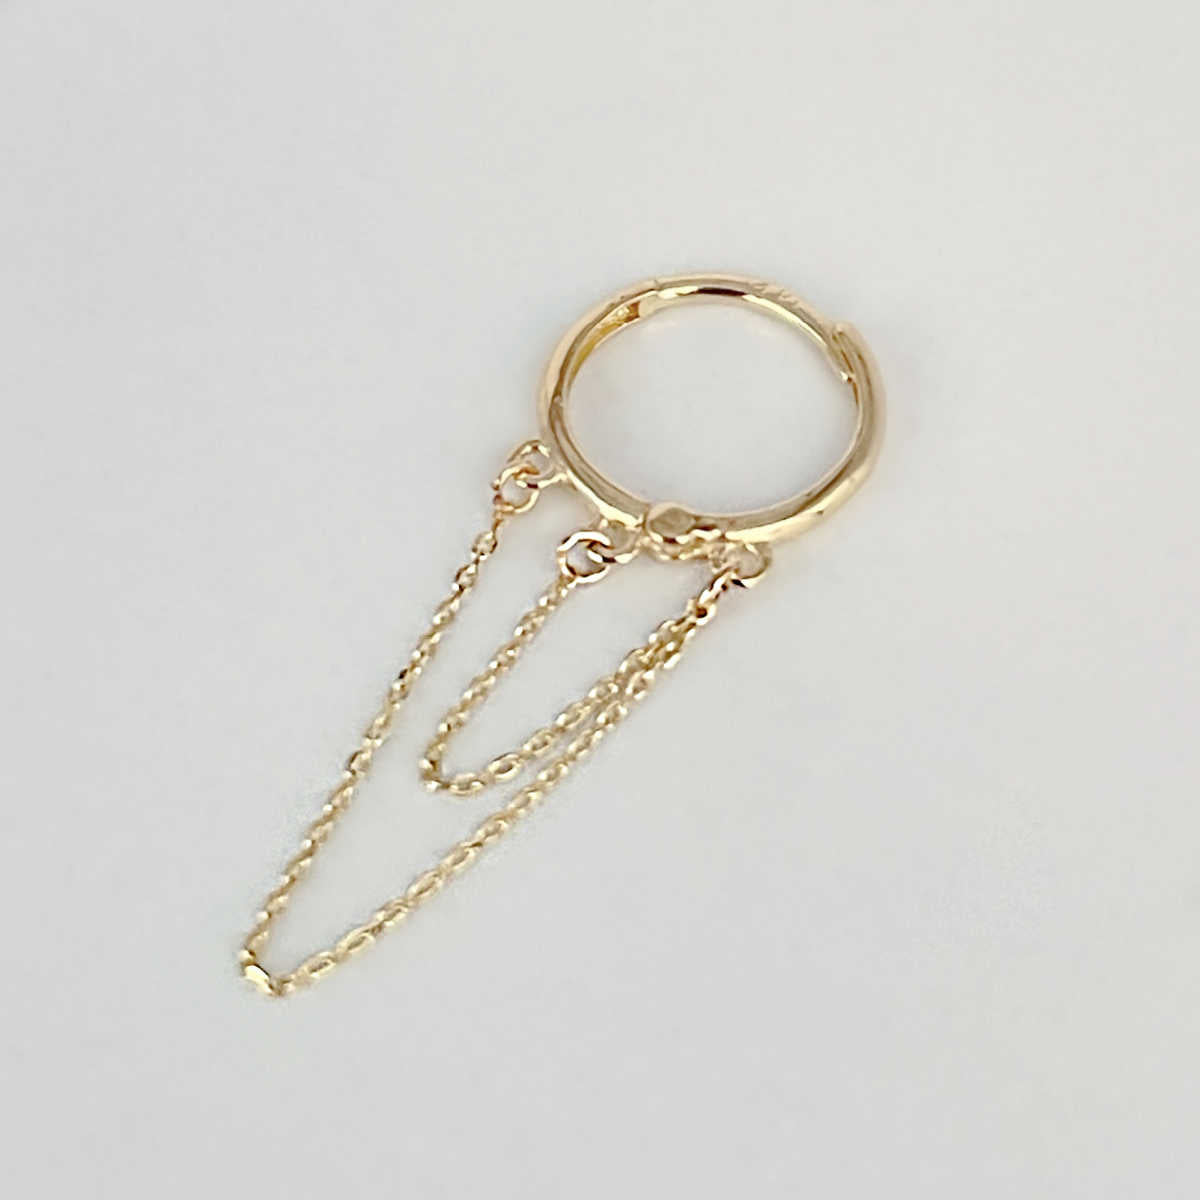 Chain Huggies | Gold Huggie Earrings with Double Chain | Gold Cartilage Hoop | Cartilage Piercing Helix Hoop Earrings from Two of Mo